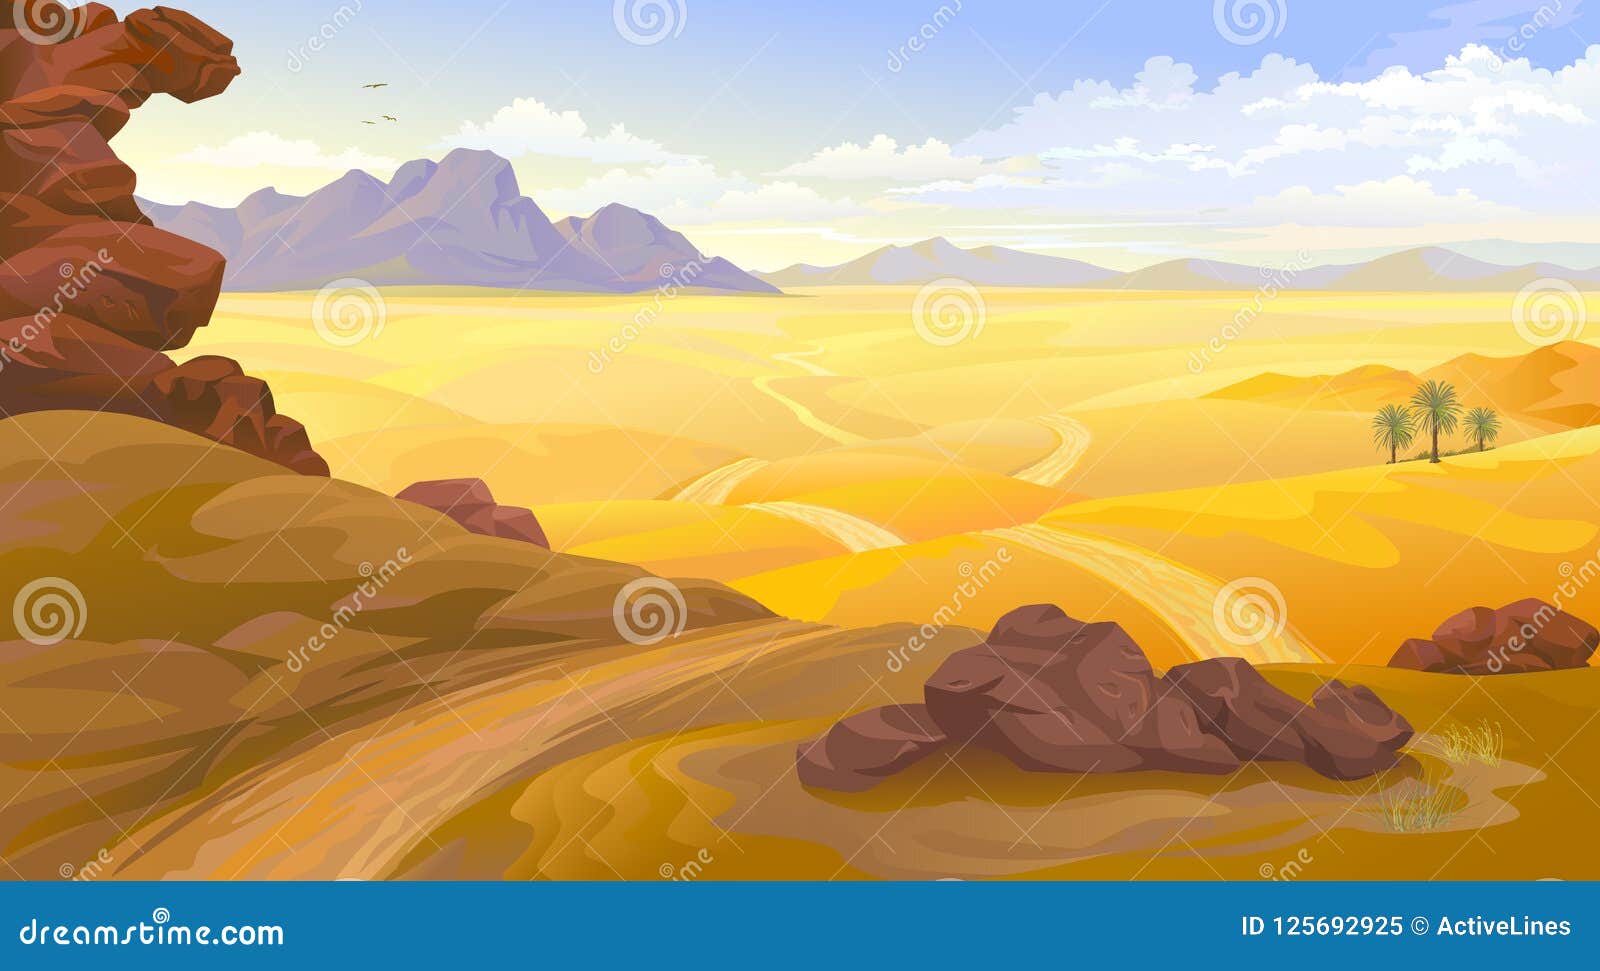 mountains and rocks on a desert landscape. a road across the empty desert.